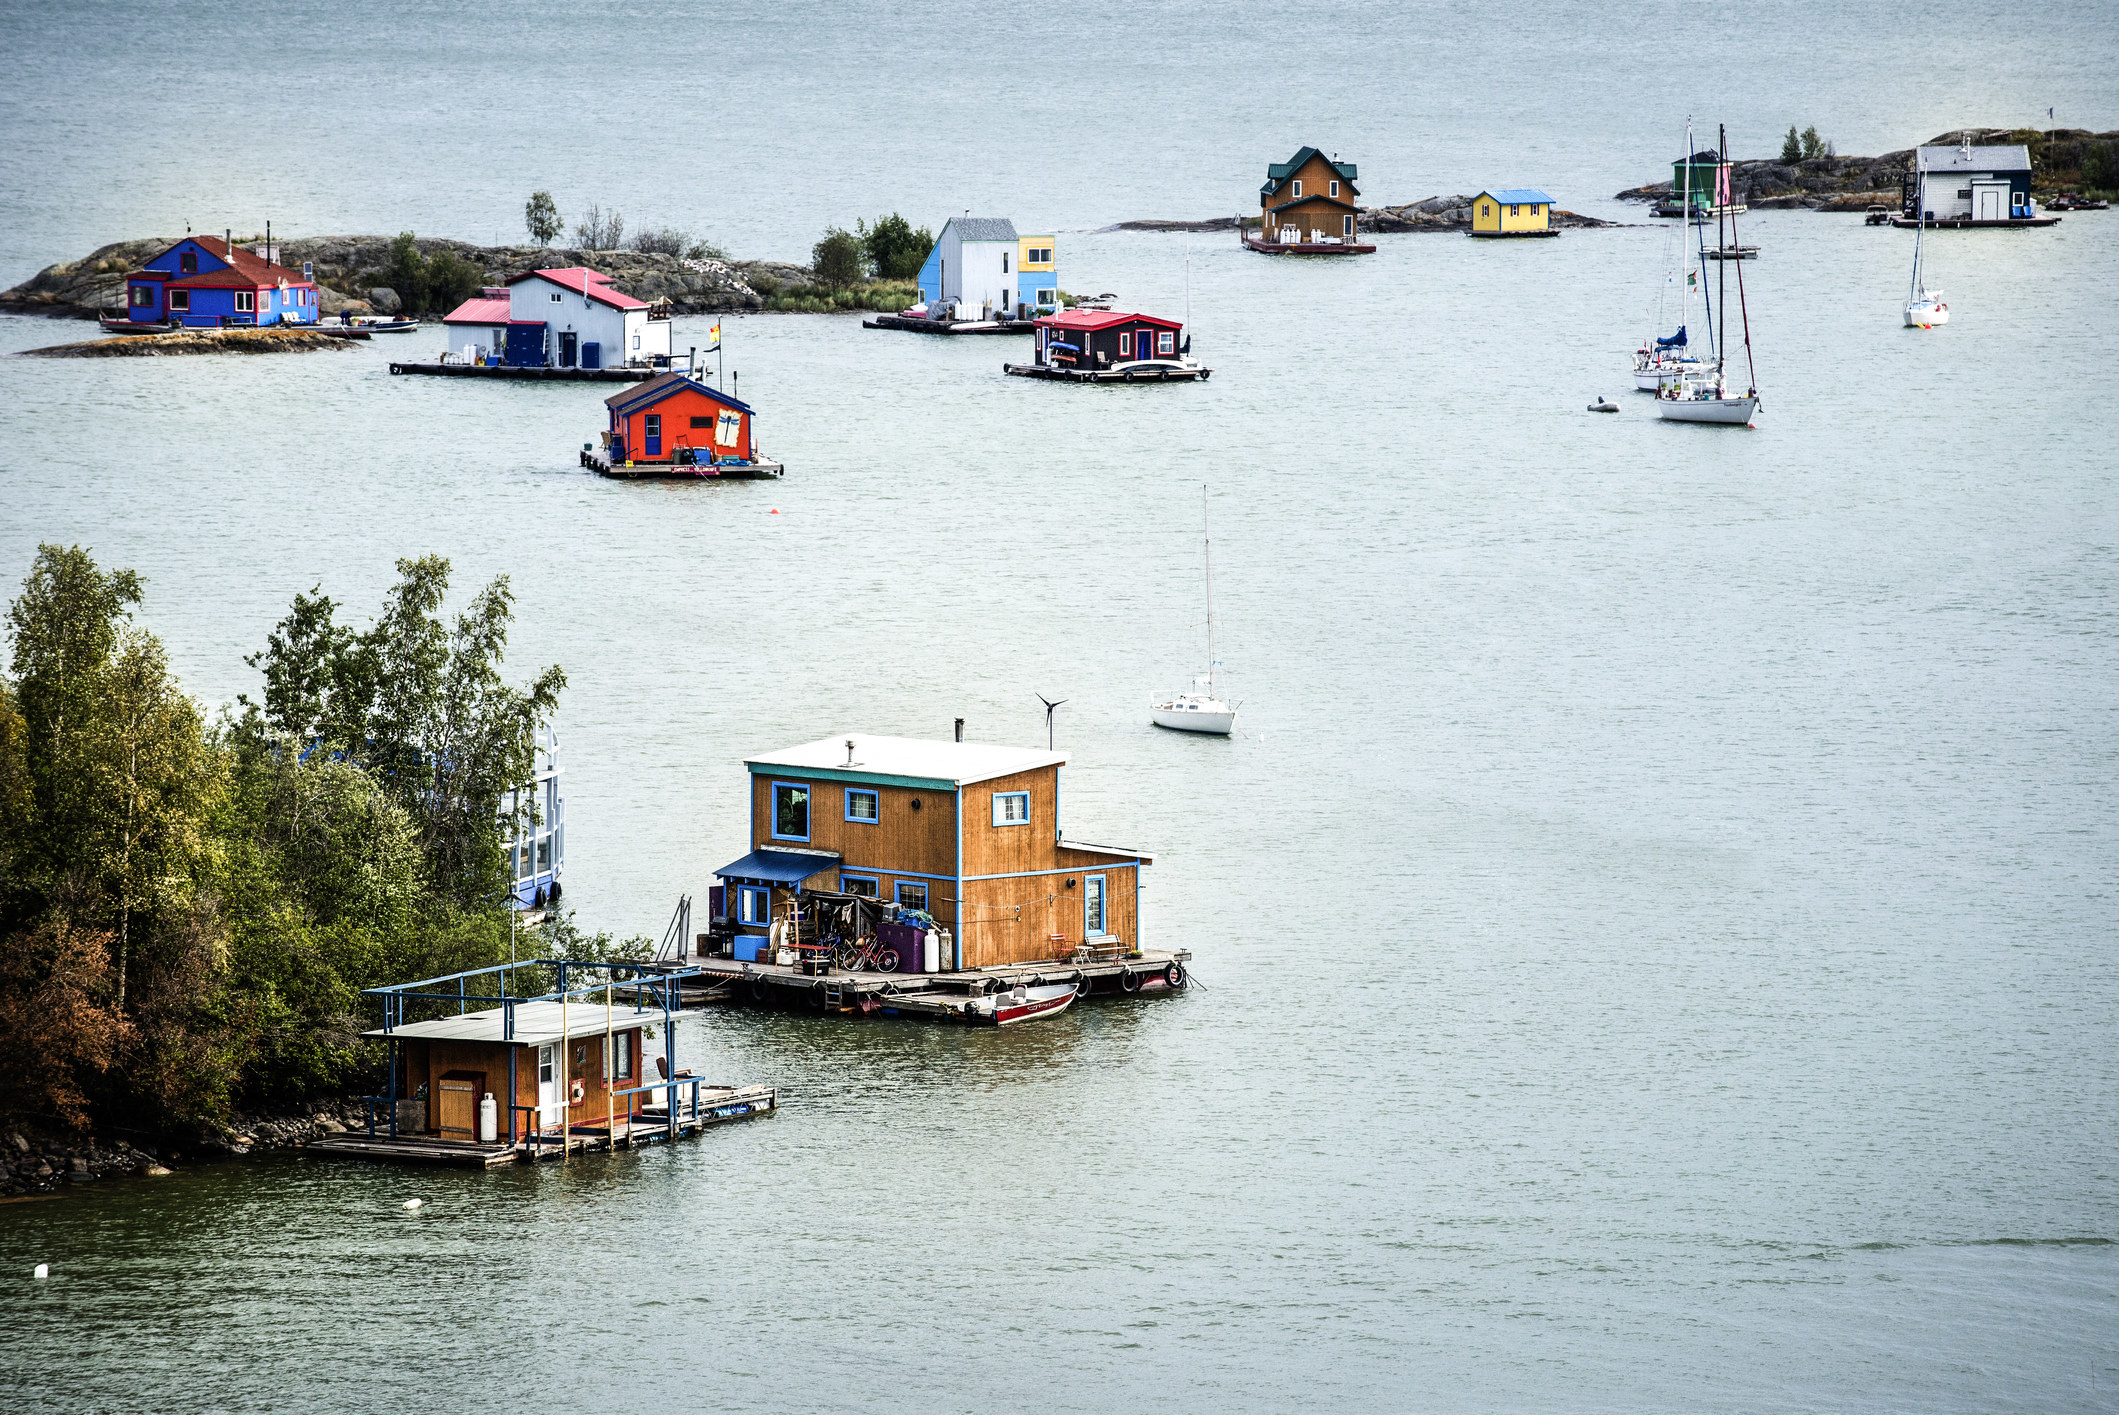 A colourful group of houseboats scattered in the bay of Great Slave Lake